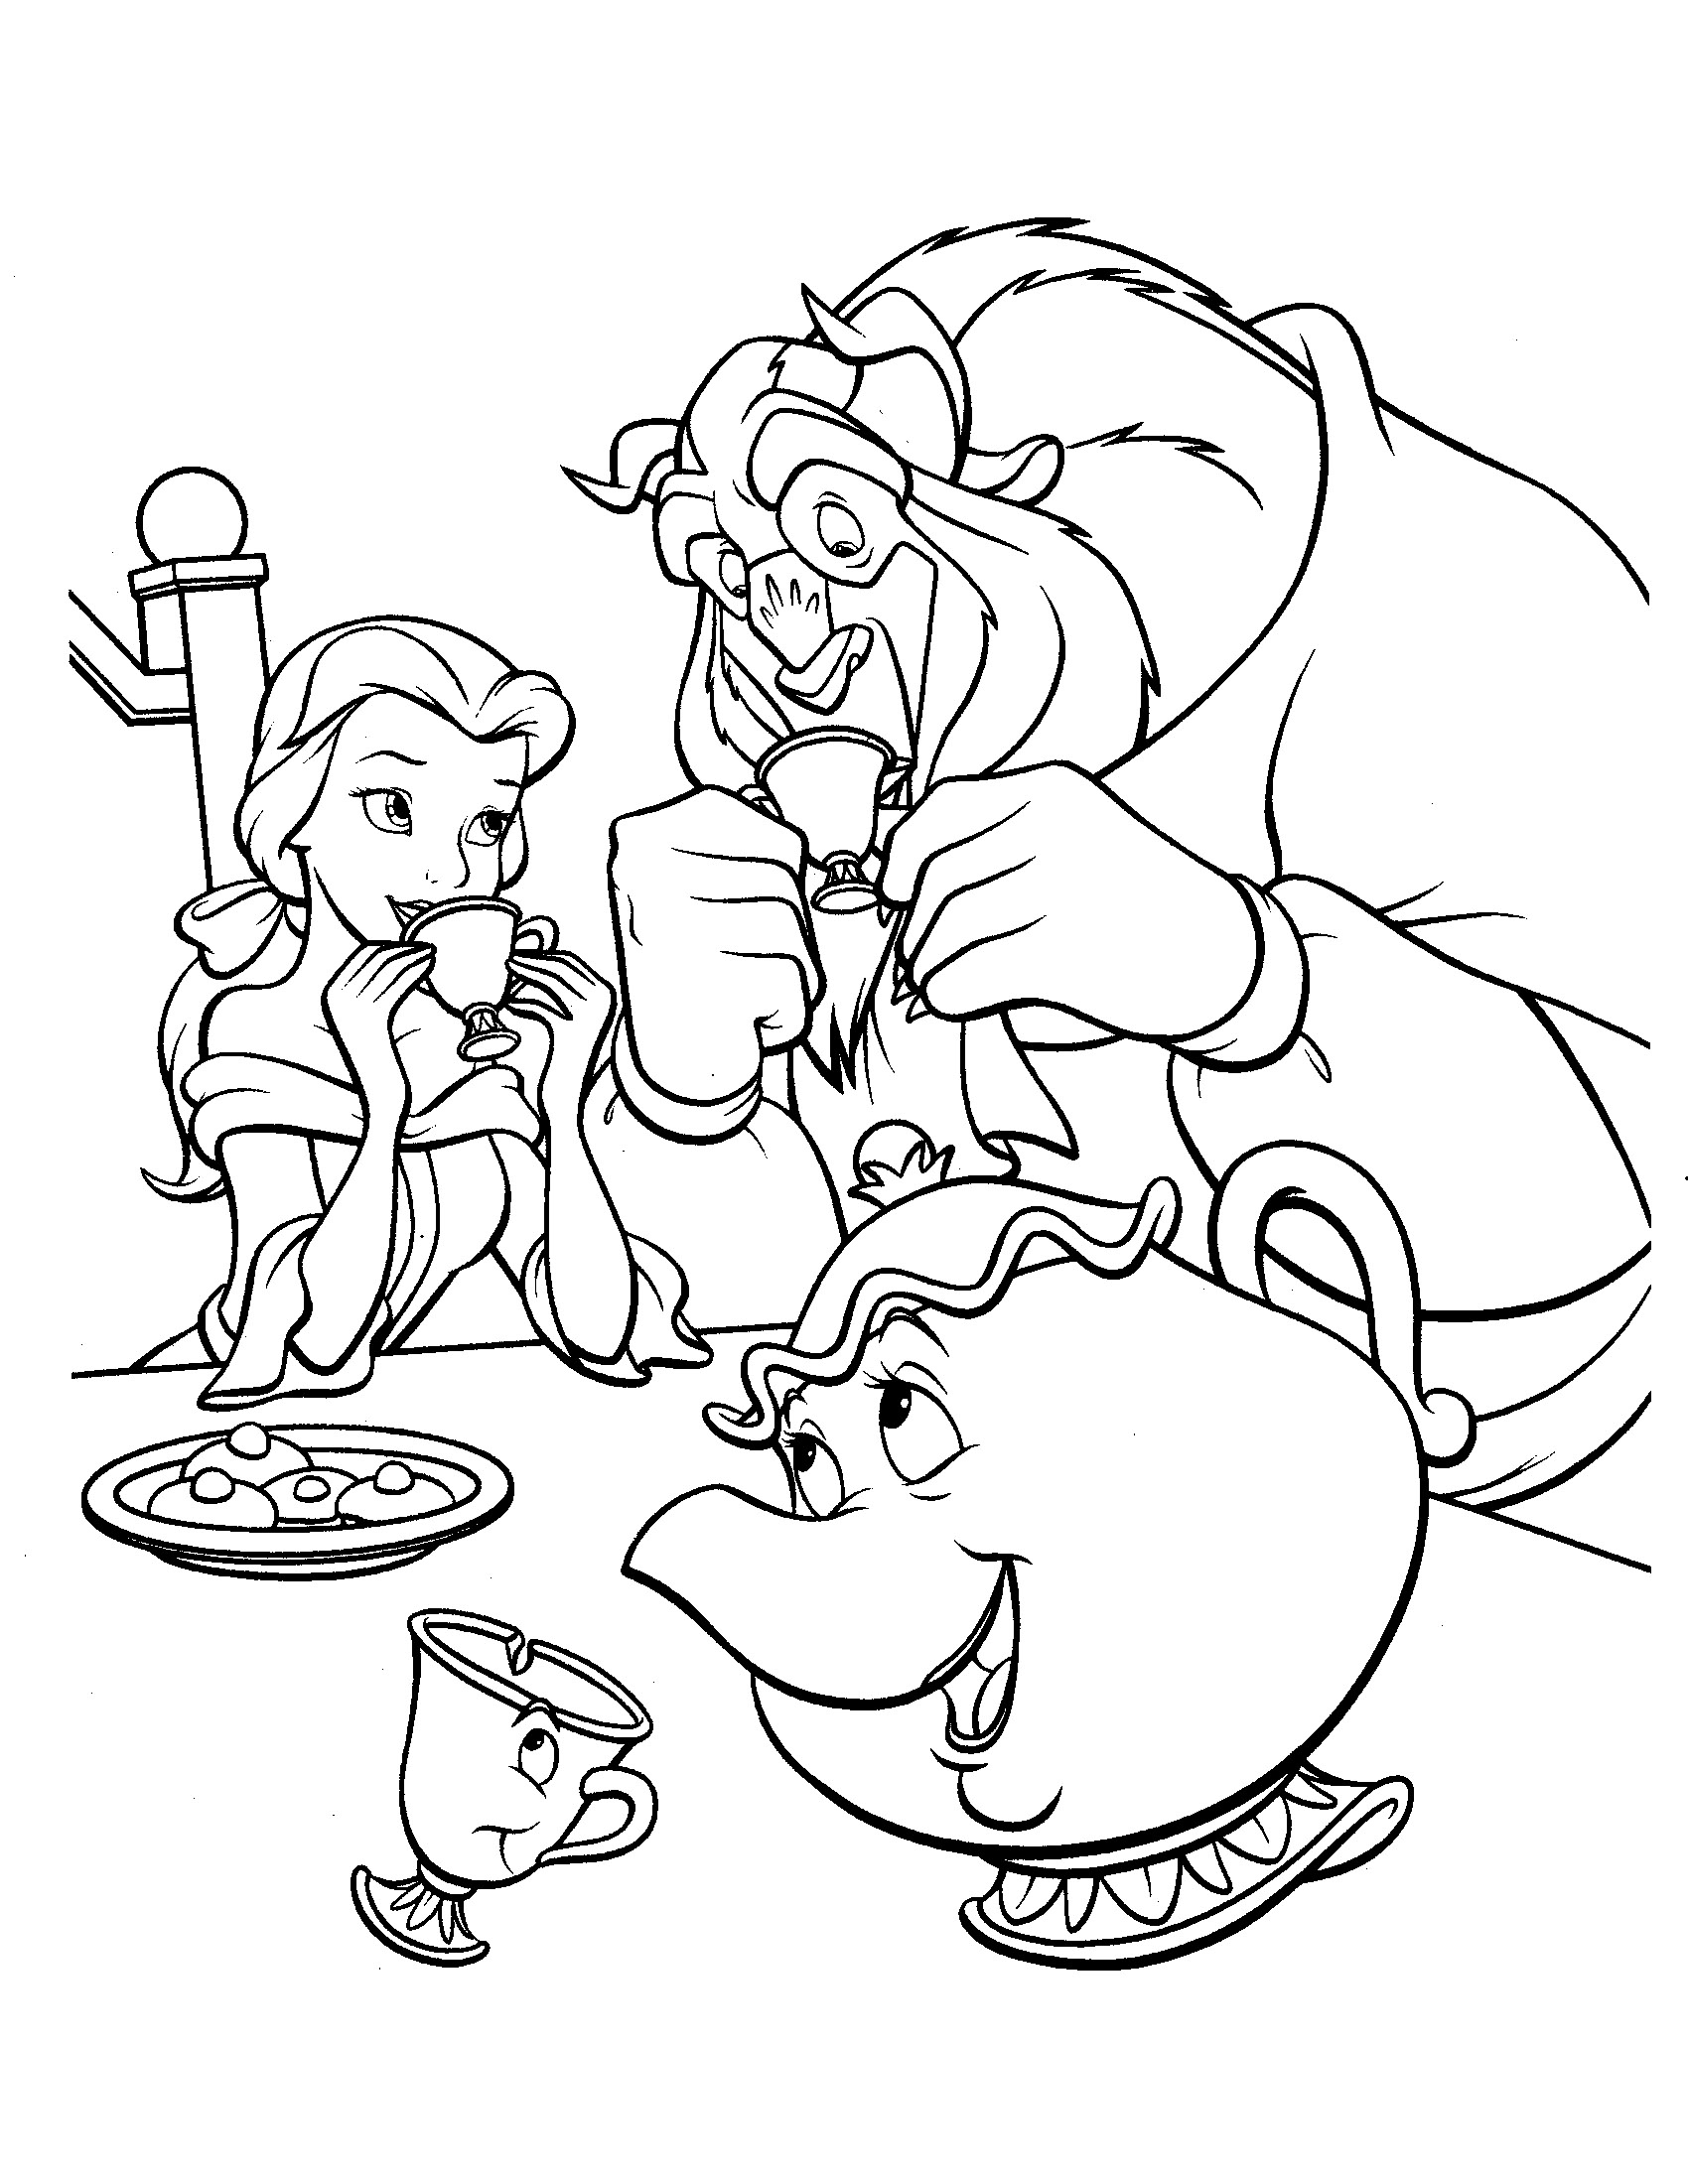 Beauty And The Beast Printables - Get Your Hands on Amazing Free ...